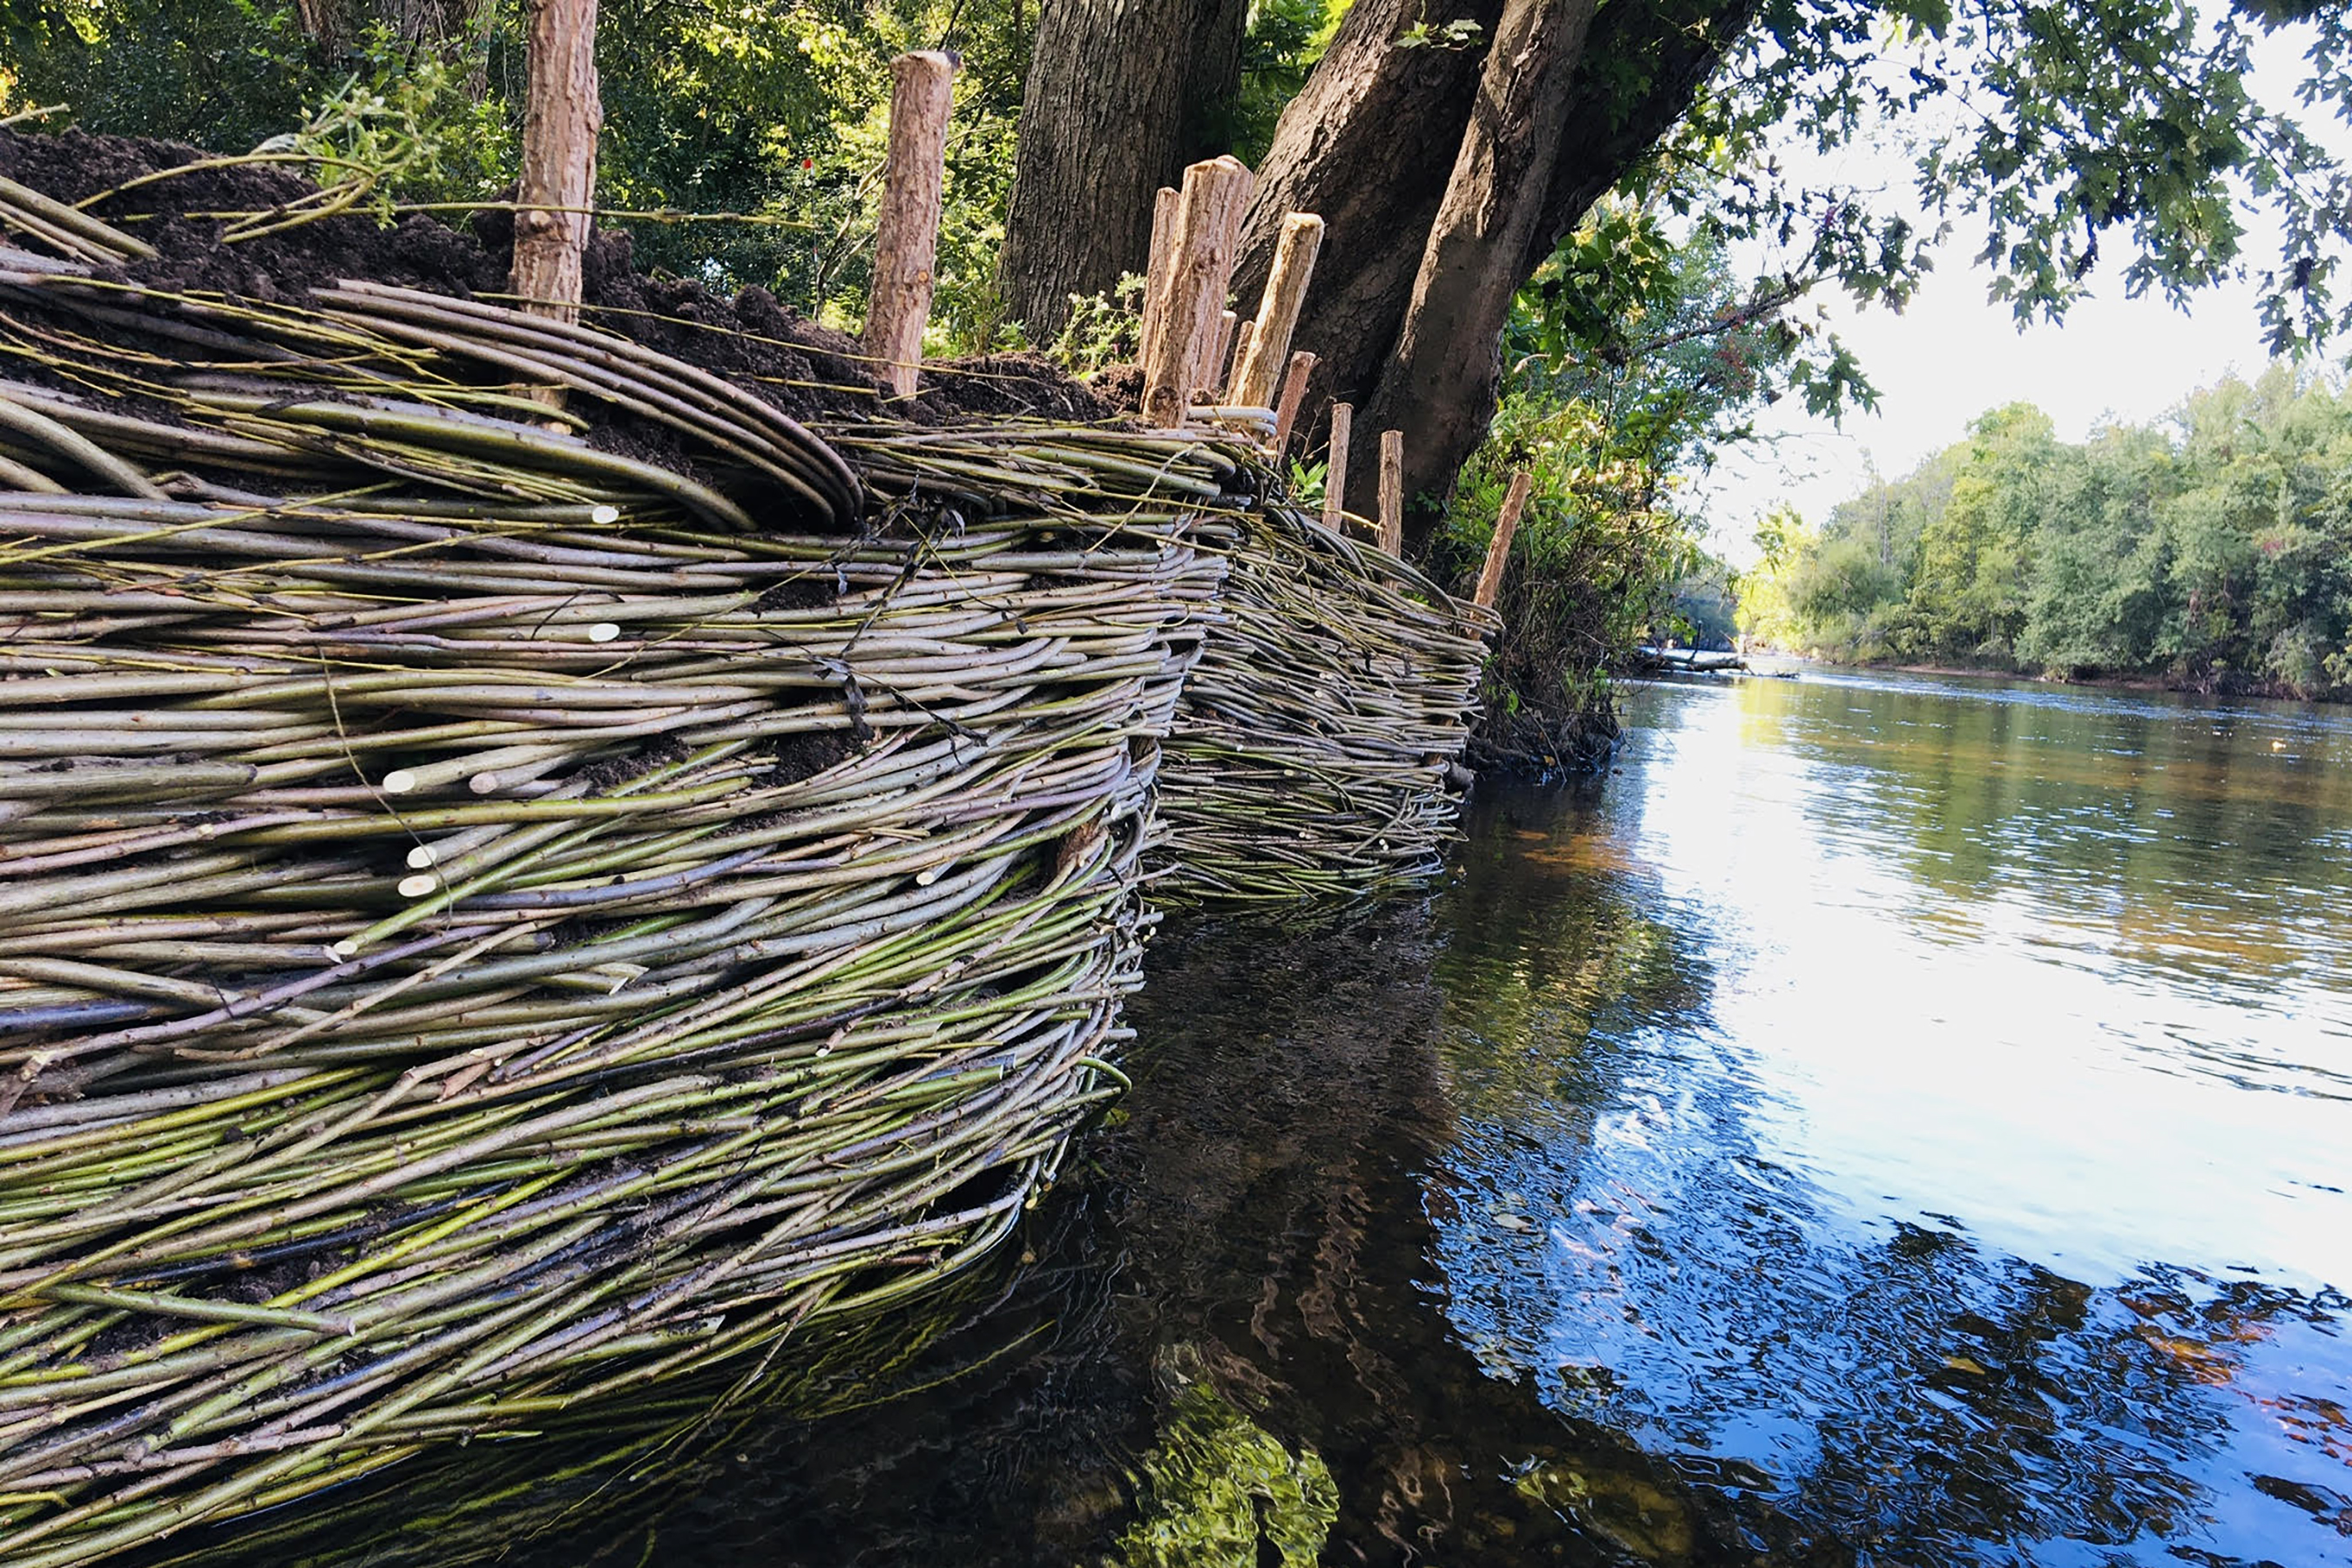 A willow weaving test strip used for erosion control along the Blackstone River